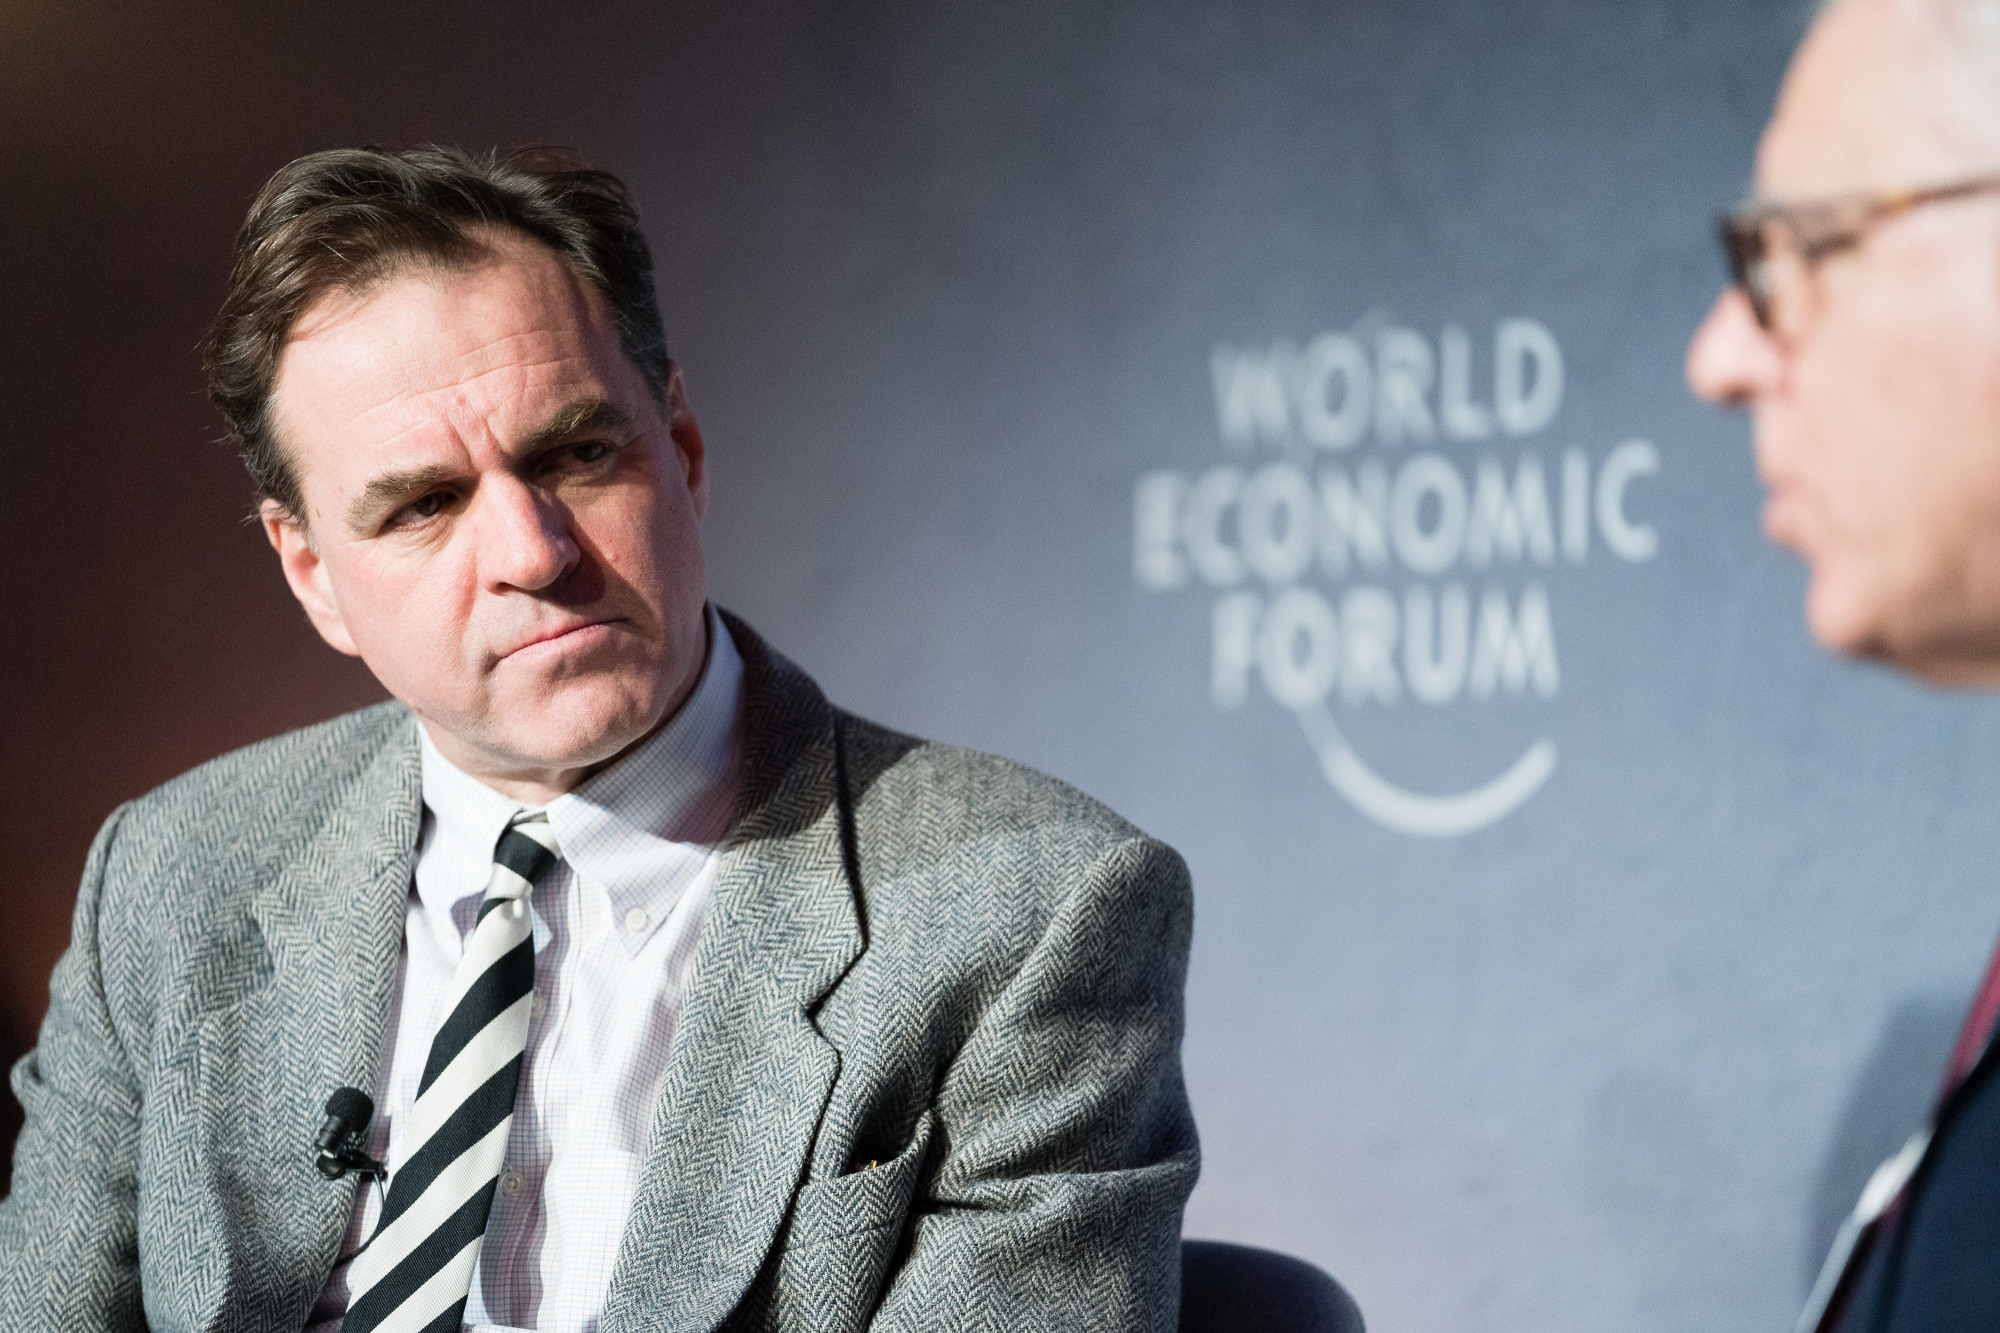 Historian Niall Ferguson says the last Cold War showed that there is always a risk that a cold war  can turn hot. | WORLD ECONOMIC FORUM / MANUEL LOPEZ